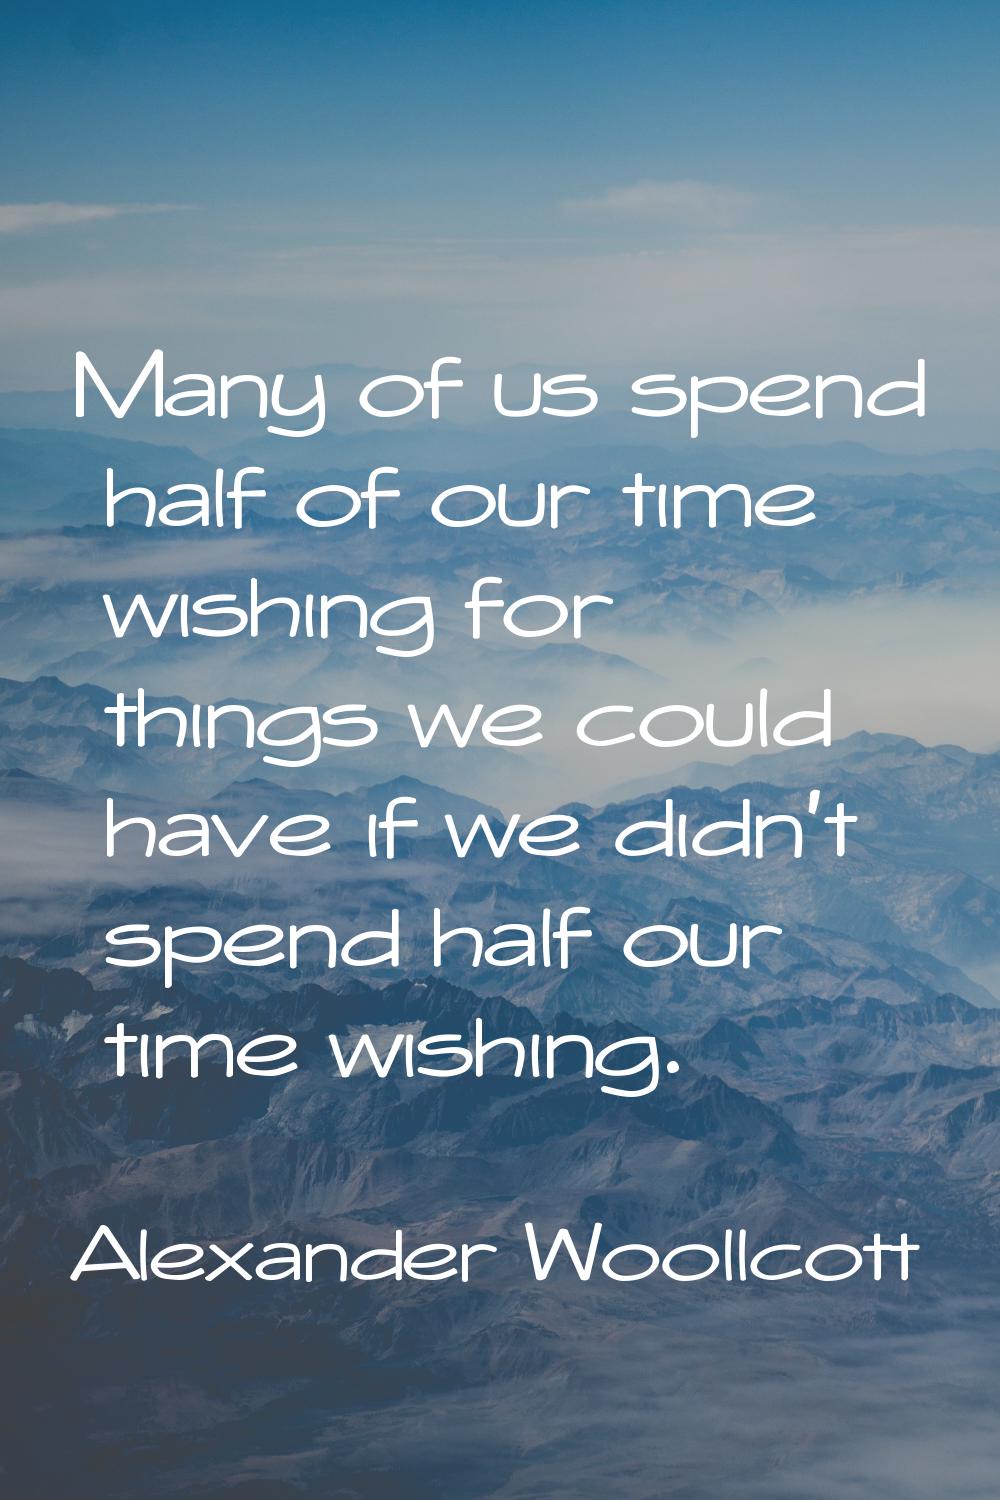 Many of us spend half of our time wishing for things we could have if we didn't spend half our time